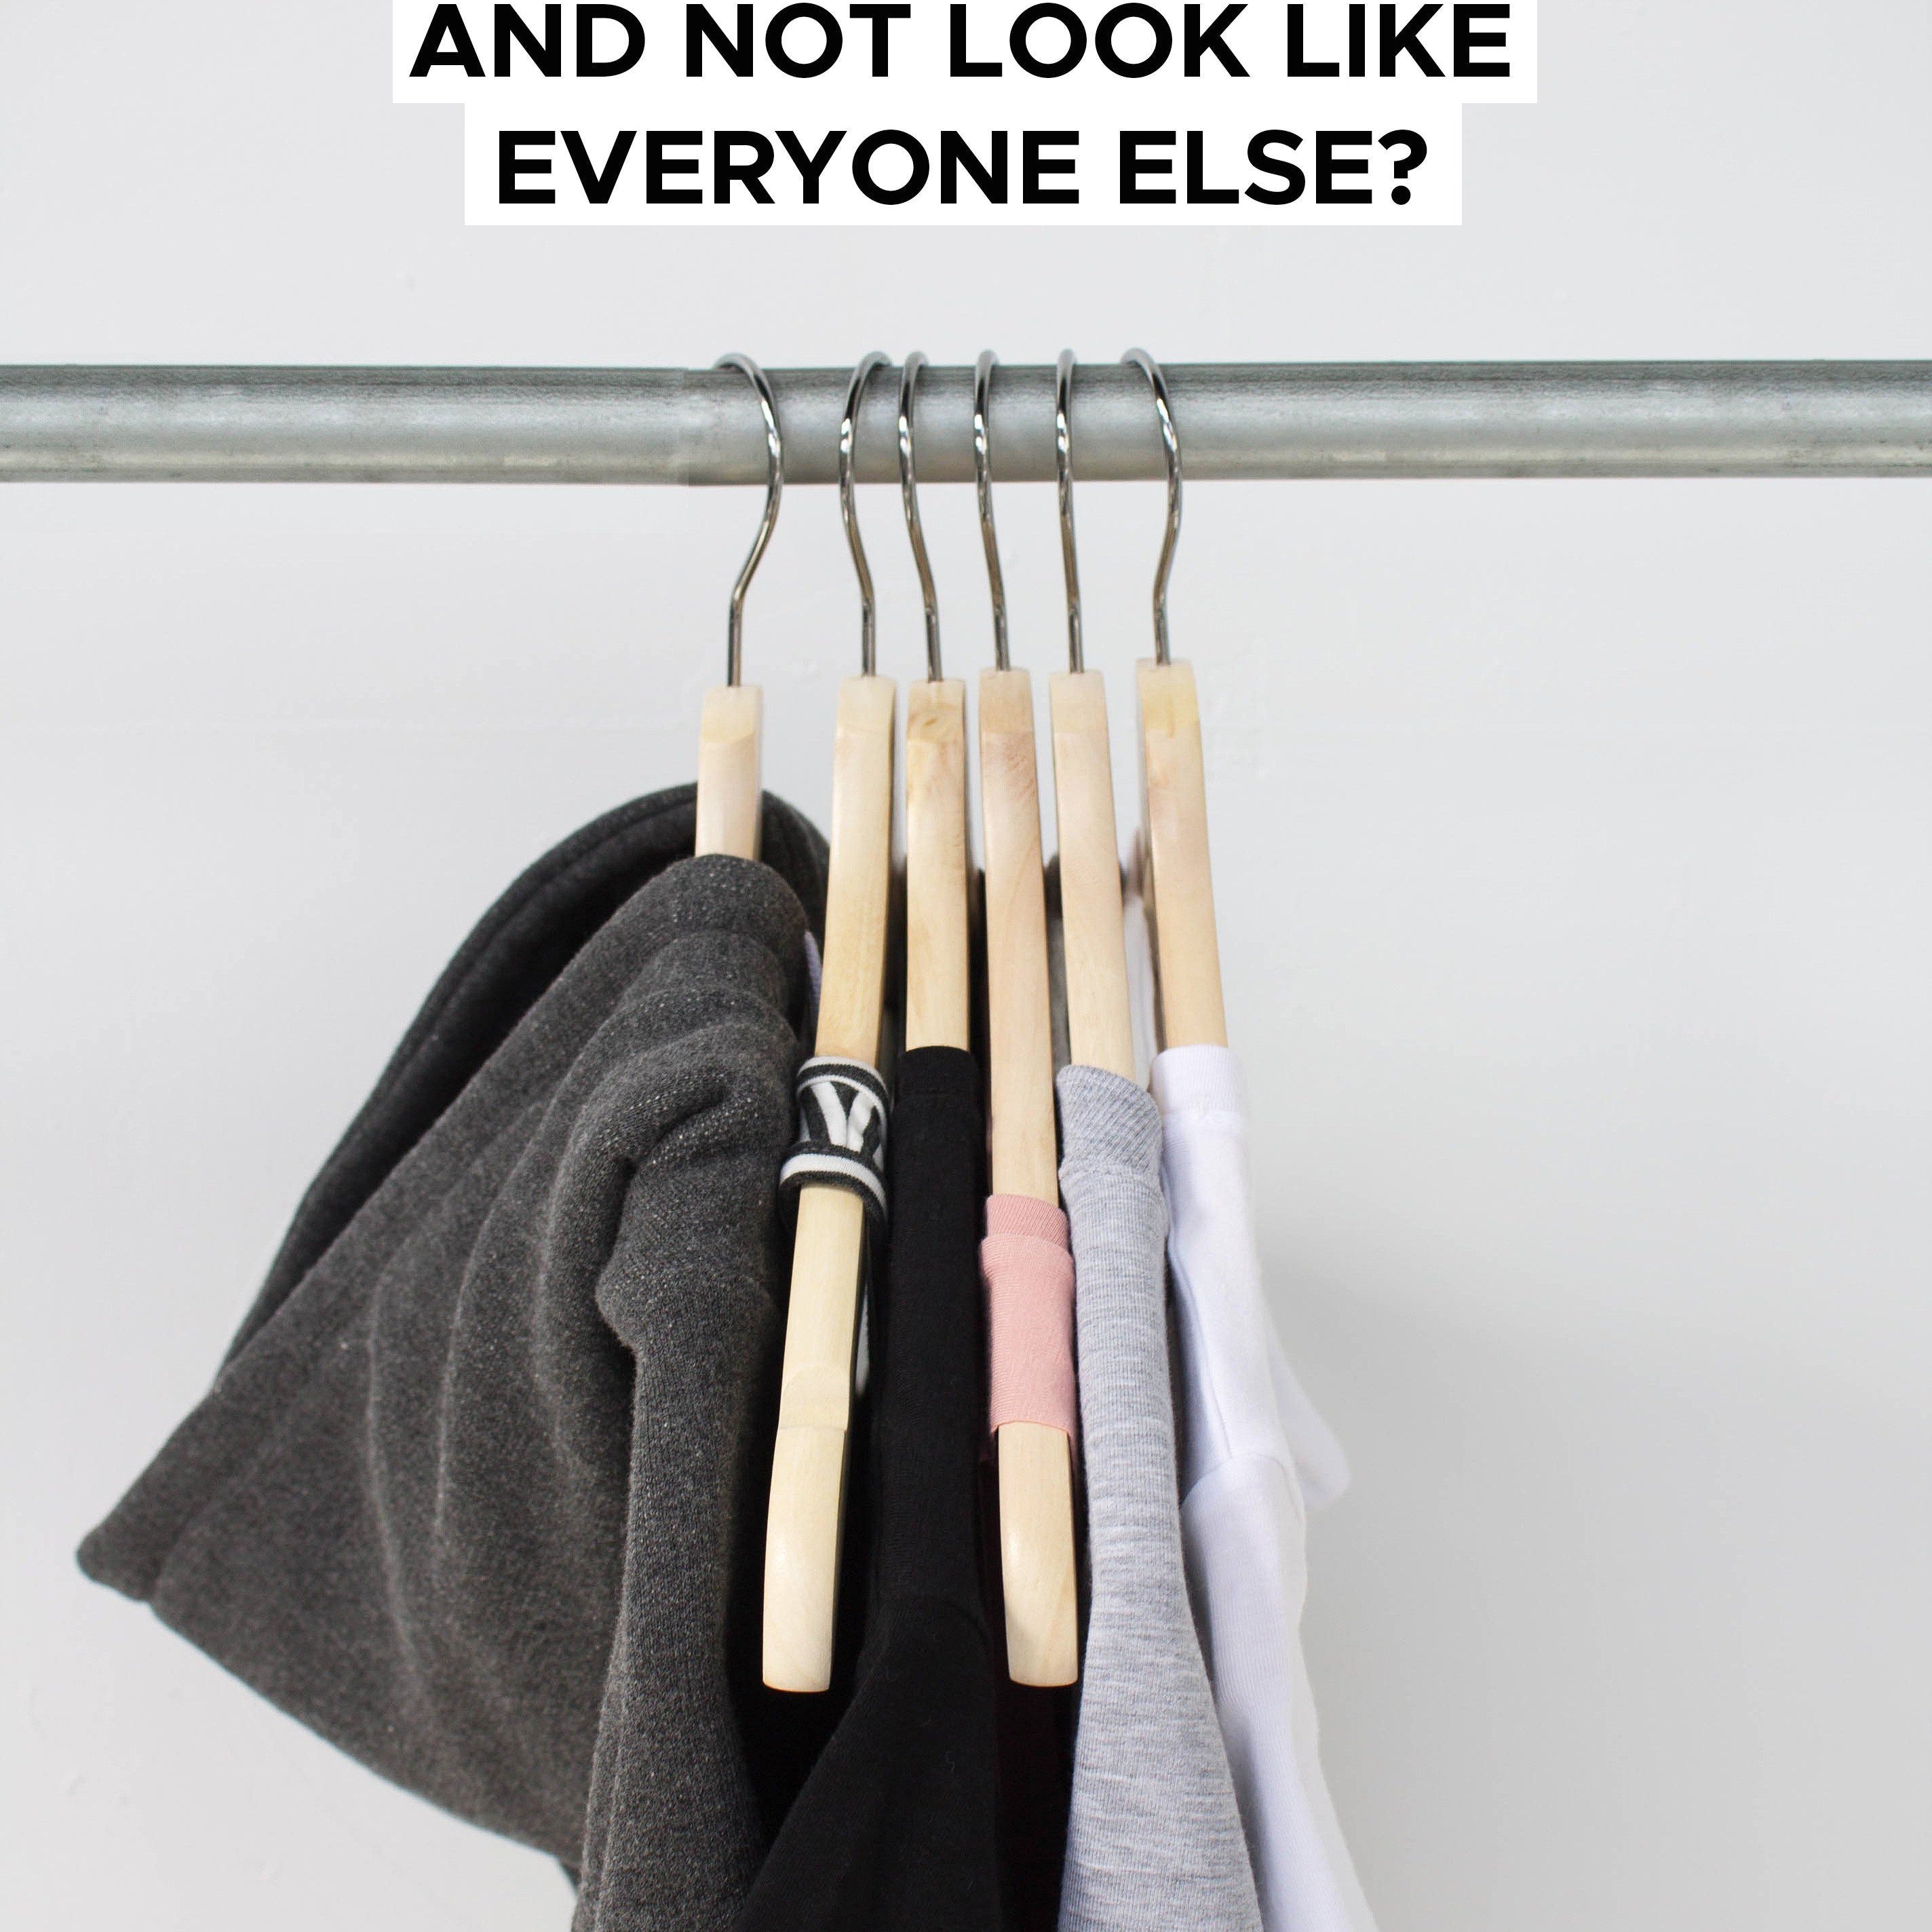 The Simple and Easy Way To Start A Capsule Wardrobe And Not Look Like Everyone Else - FRANC